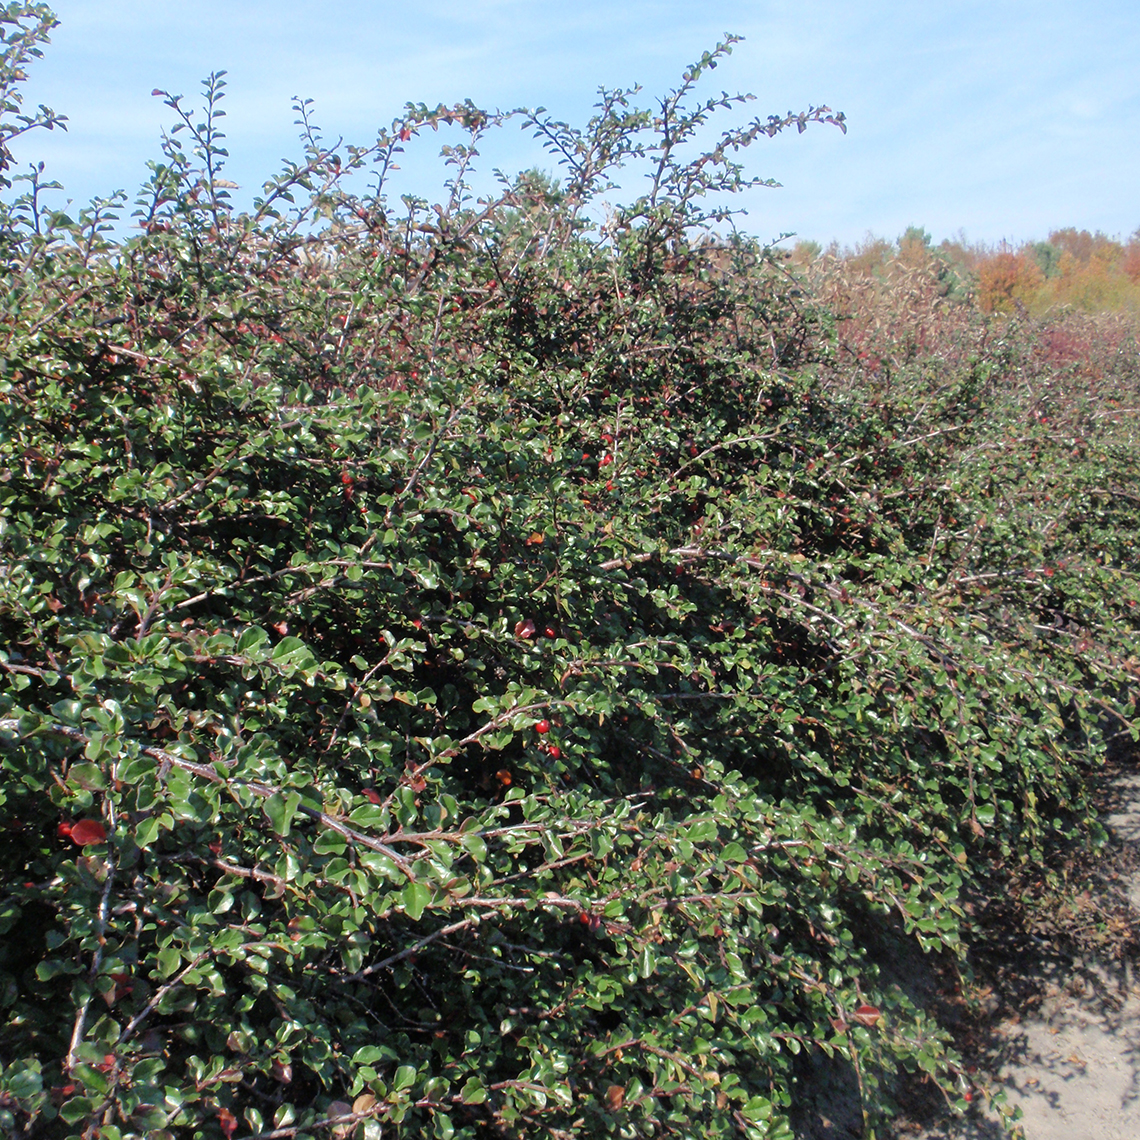 Row of Cotoneaster apiculatus in growing field